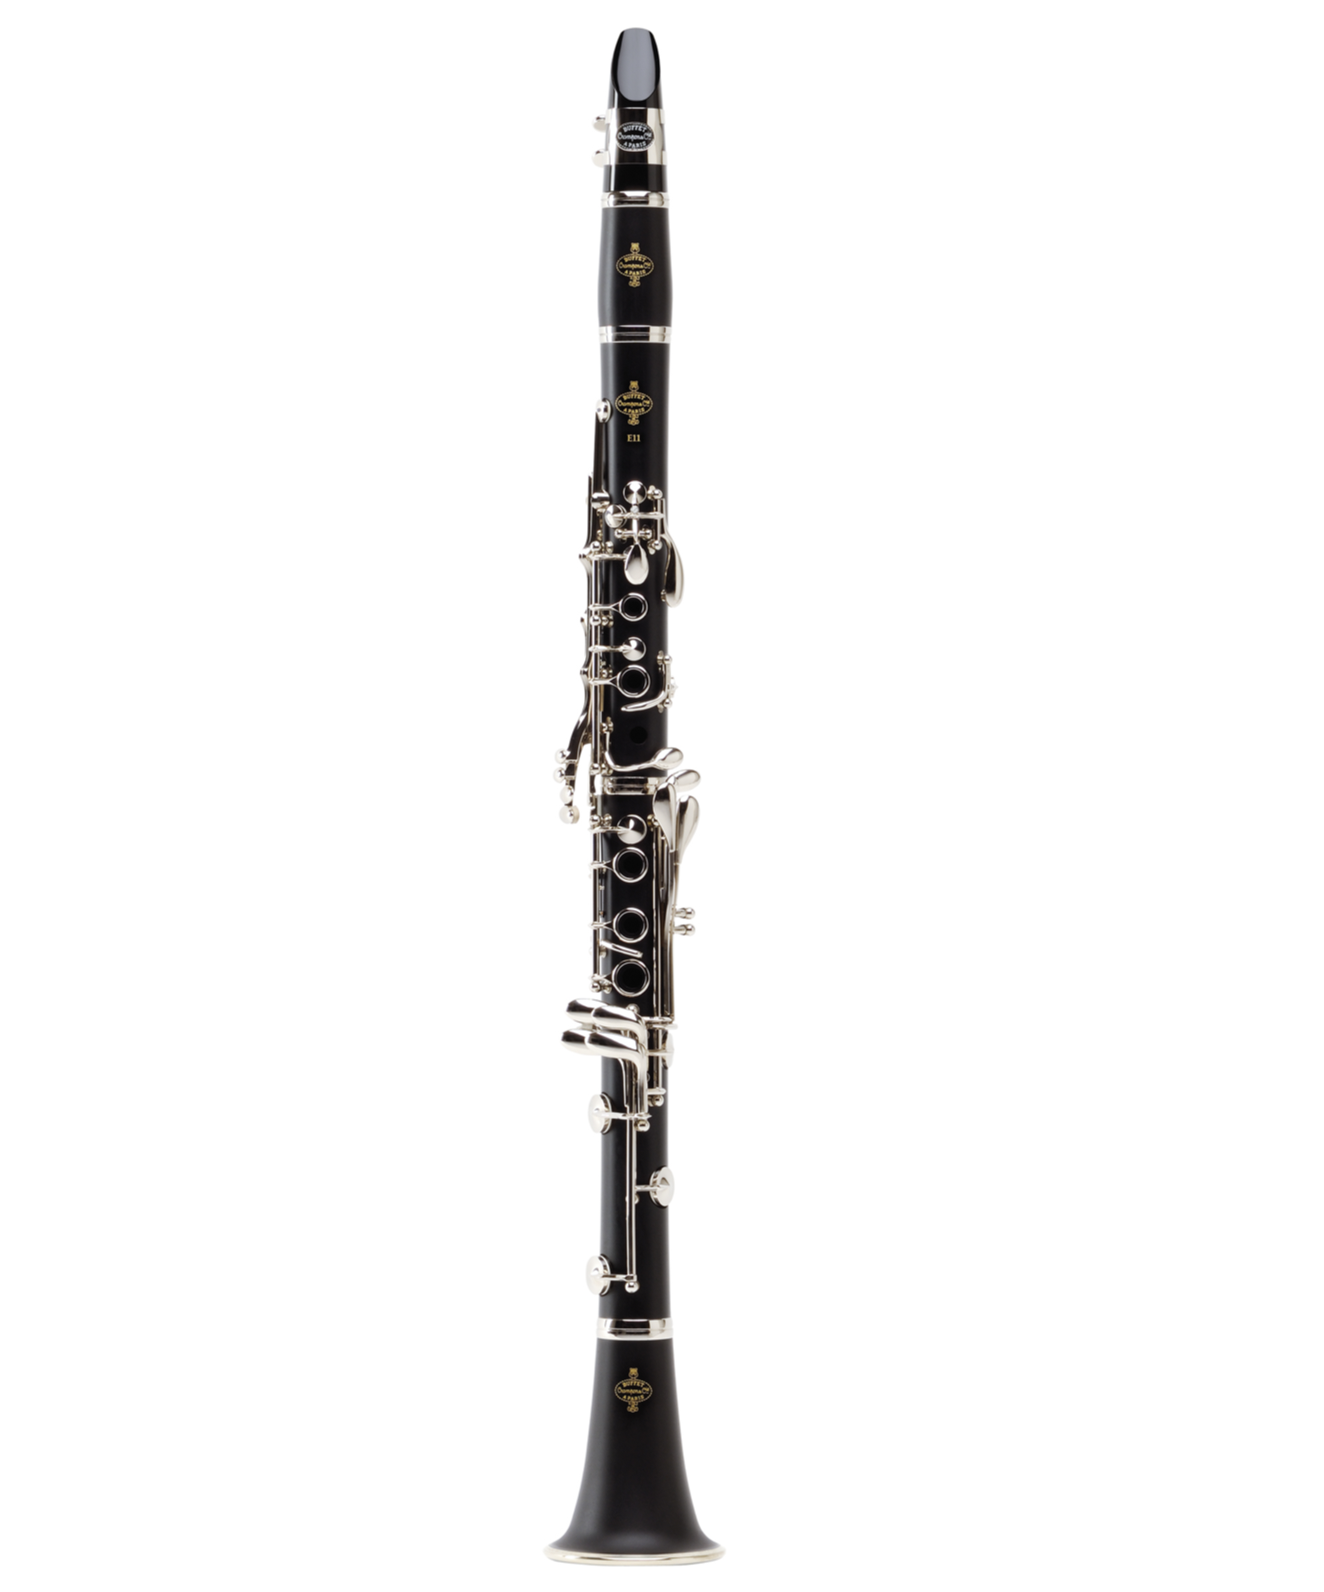 Clarinet in C, mod. E11, by Buffet Crampon